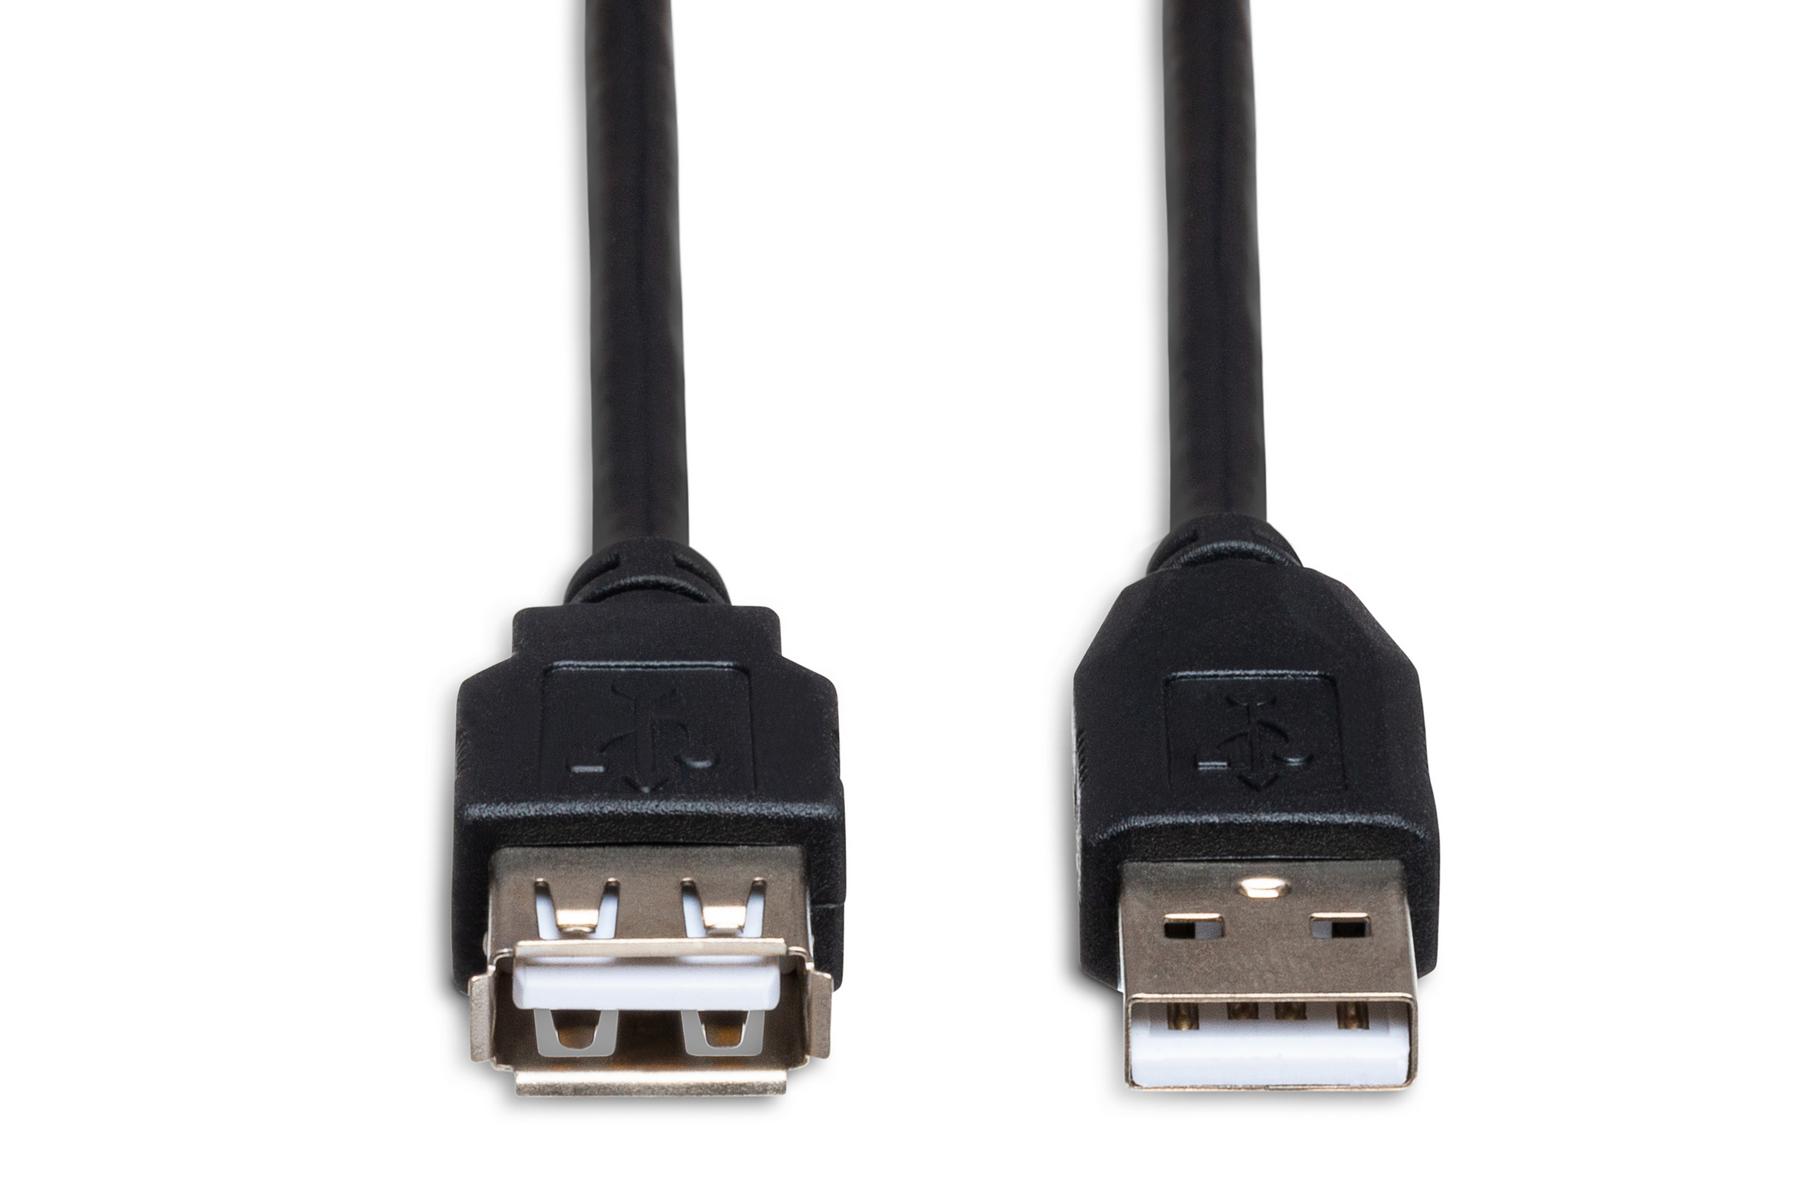 USB Extender Cable (Industrial) – CommFront